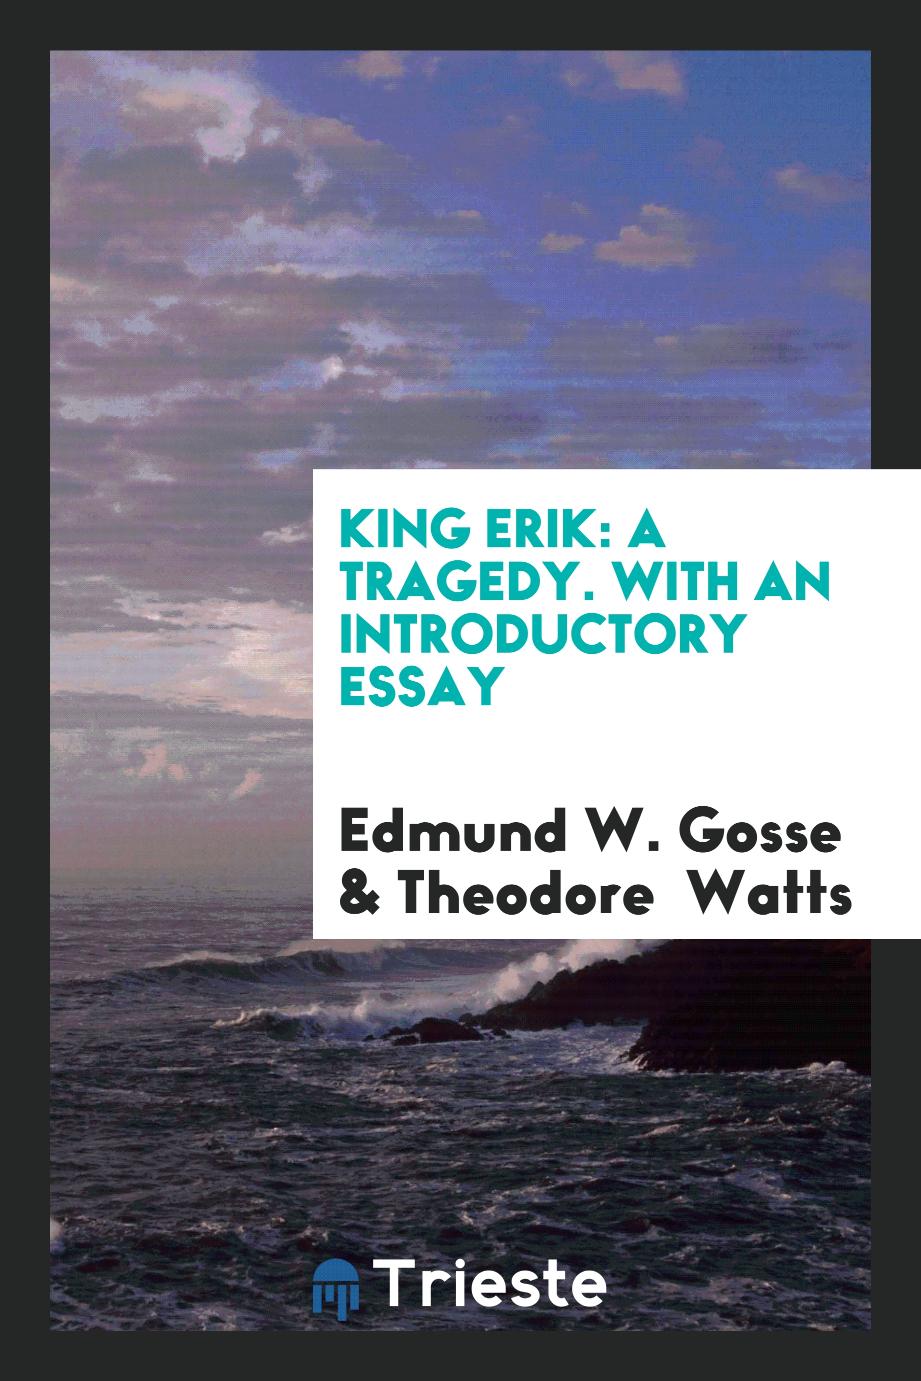 King Erik: A Tragedy. With an Introductory Essay